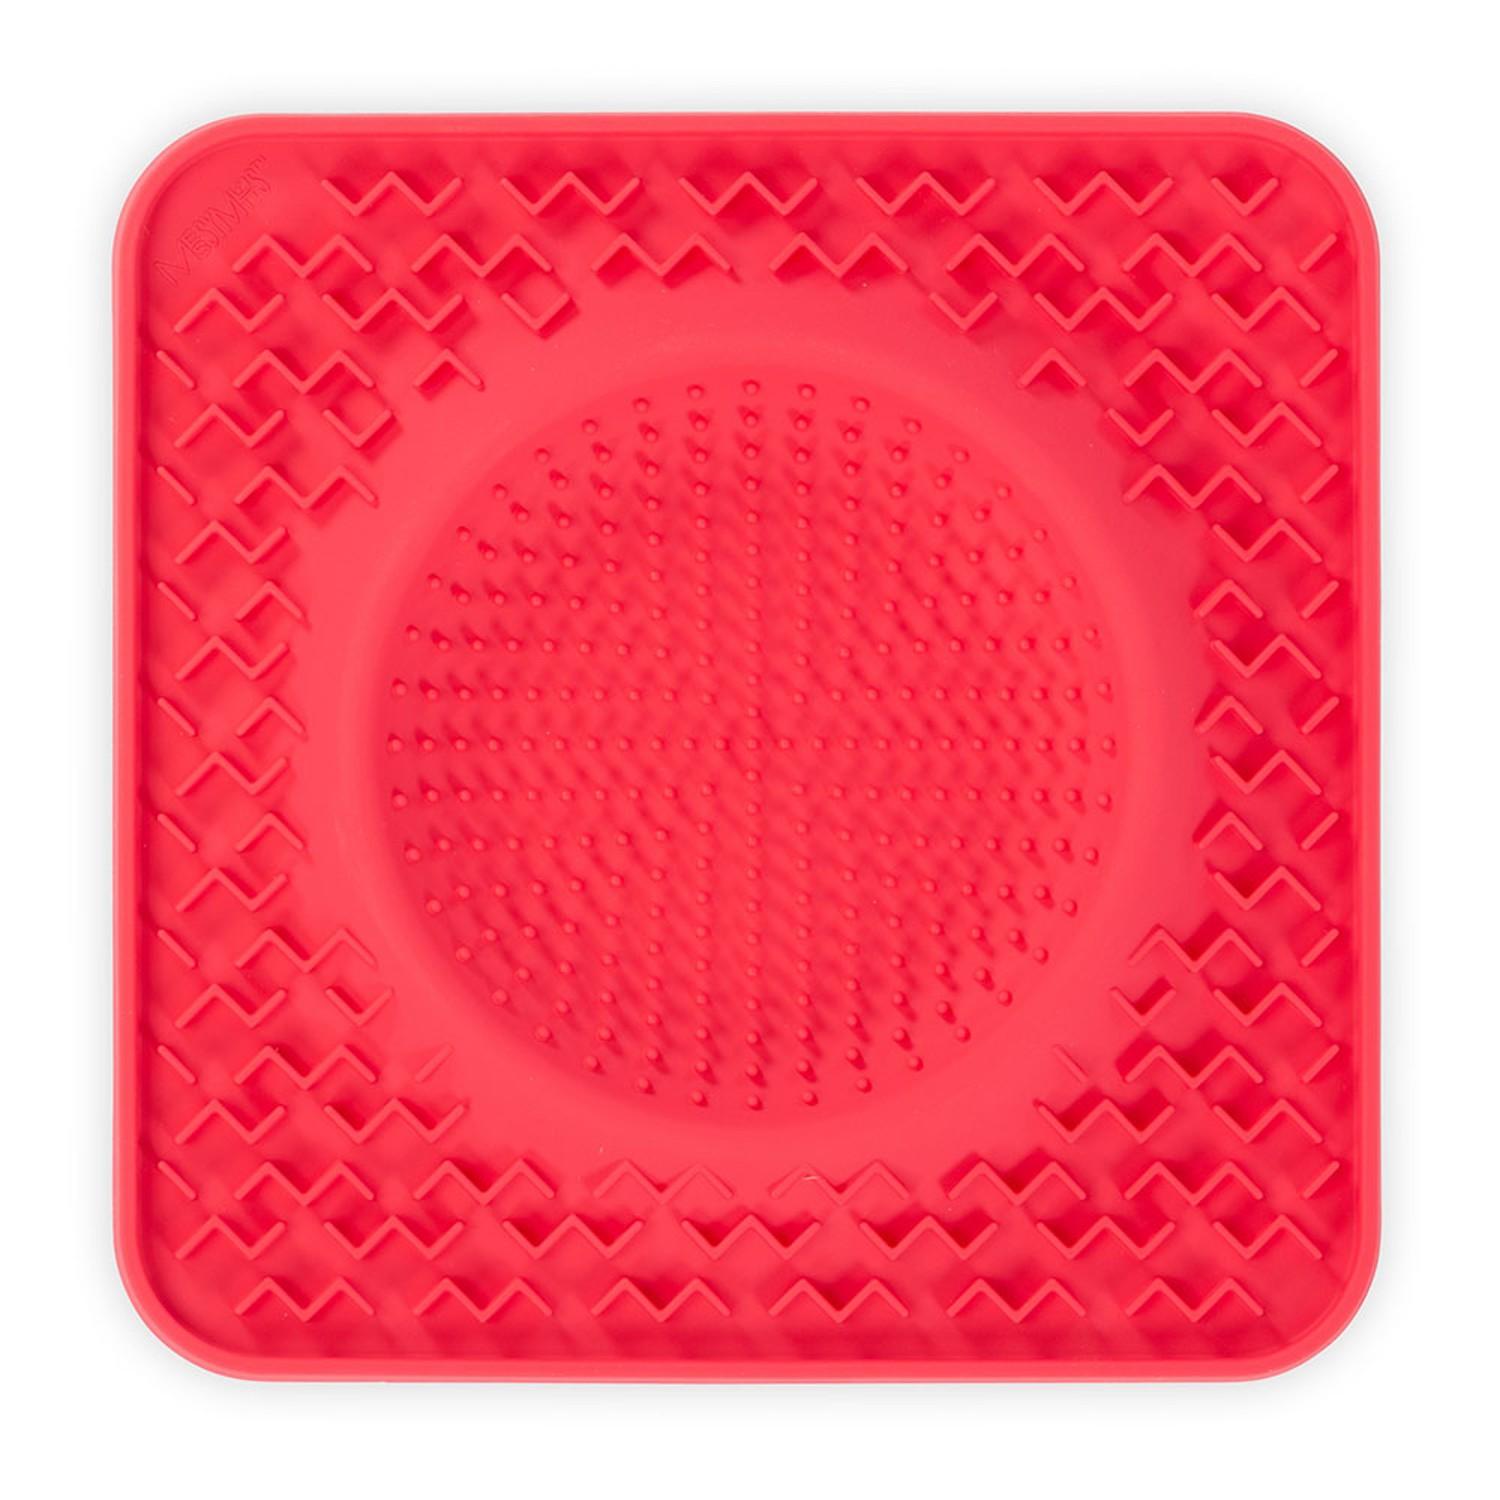 Messy Mutts Silicone Therapeutic Licking Dog Bowl Mat - Watermelon